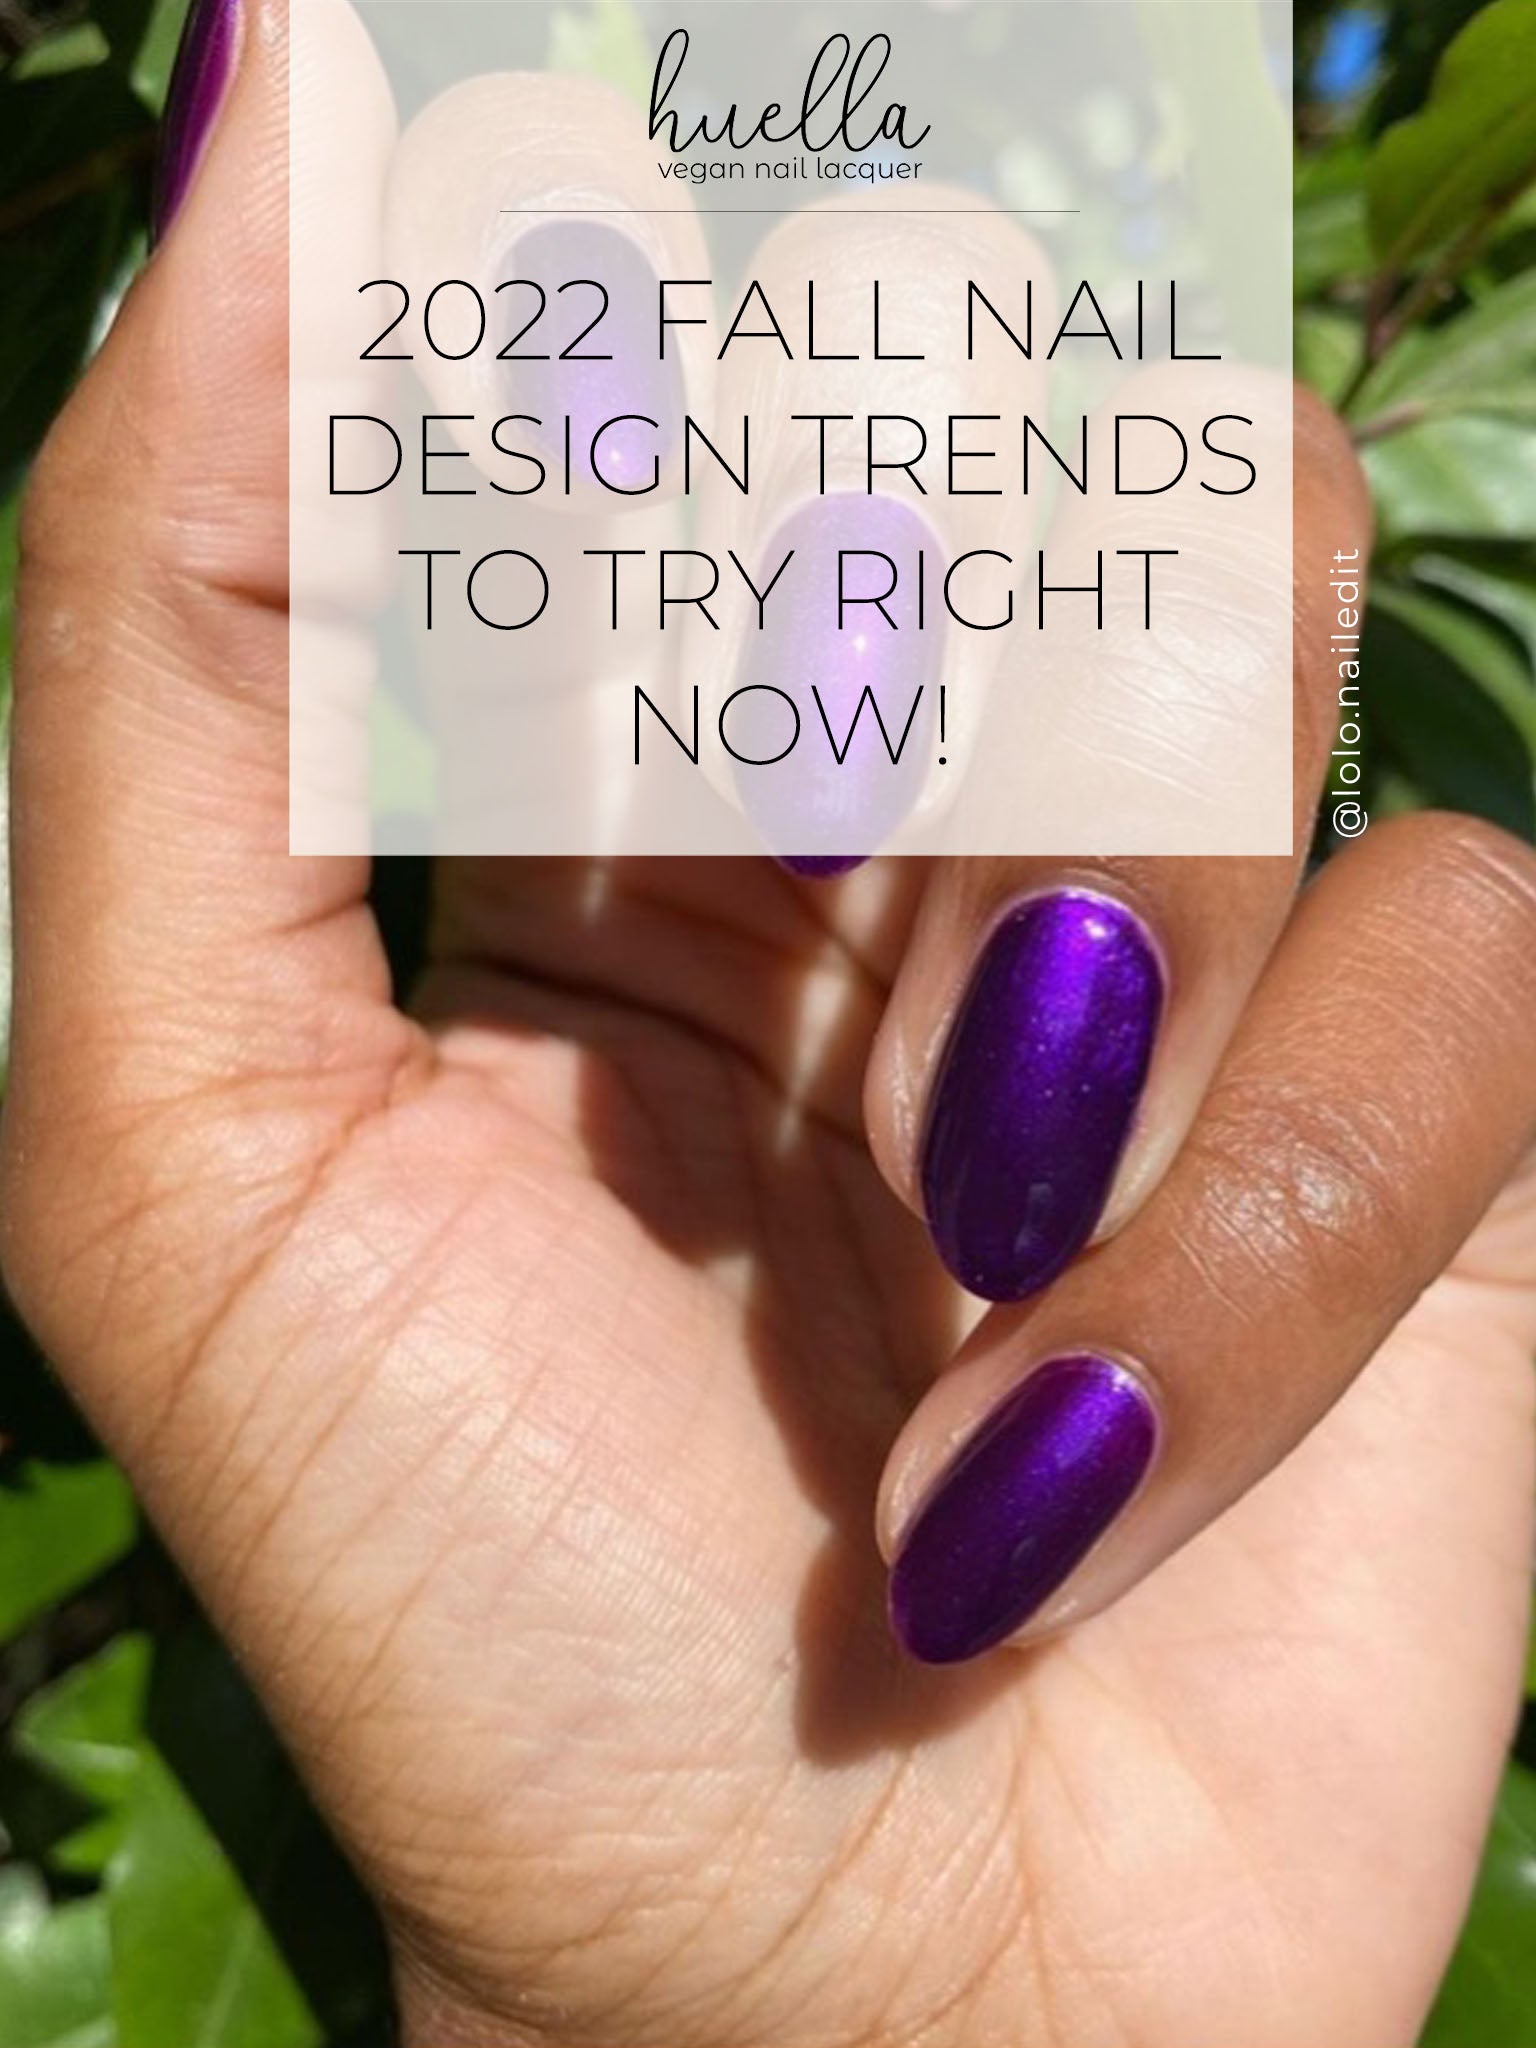 2022 Fall Nail Design Trends You Will Want to Try Right Now!